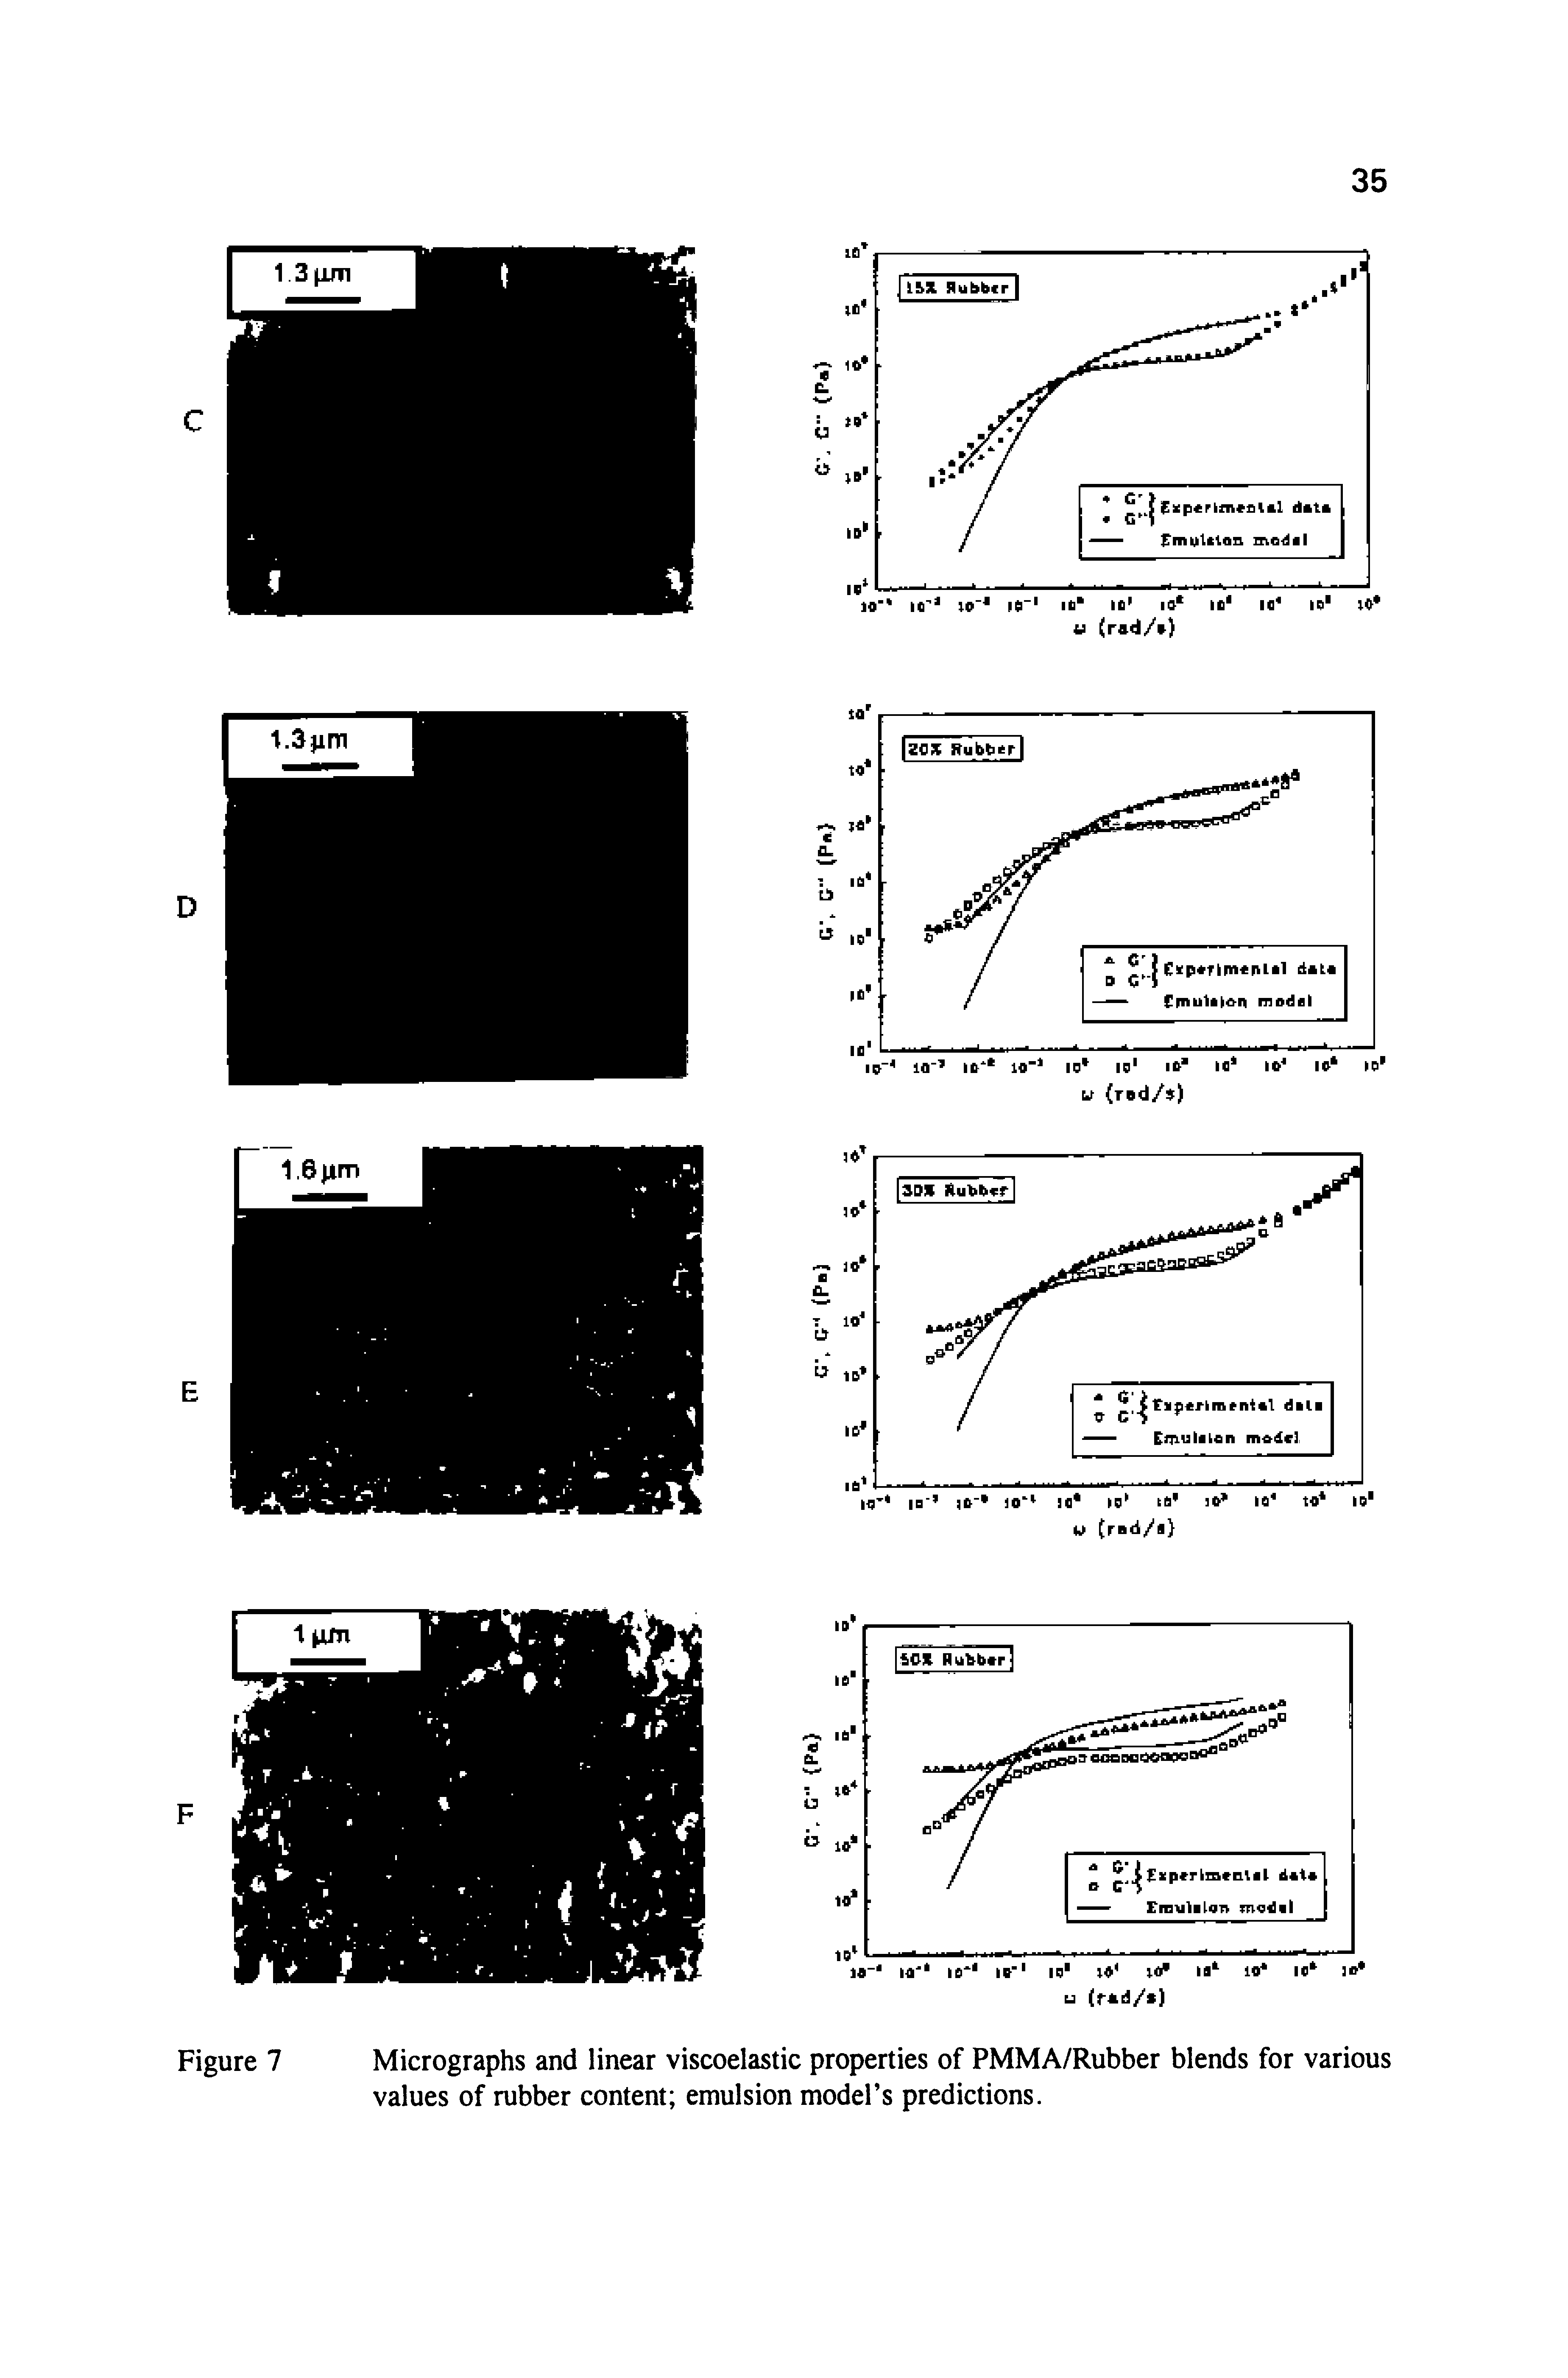 Figure 7 Micrographs and linear viscoelastic properties of PMMA/Rubber blends for various values of rubber content emulsion model s predictions.